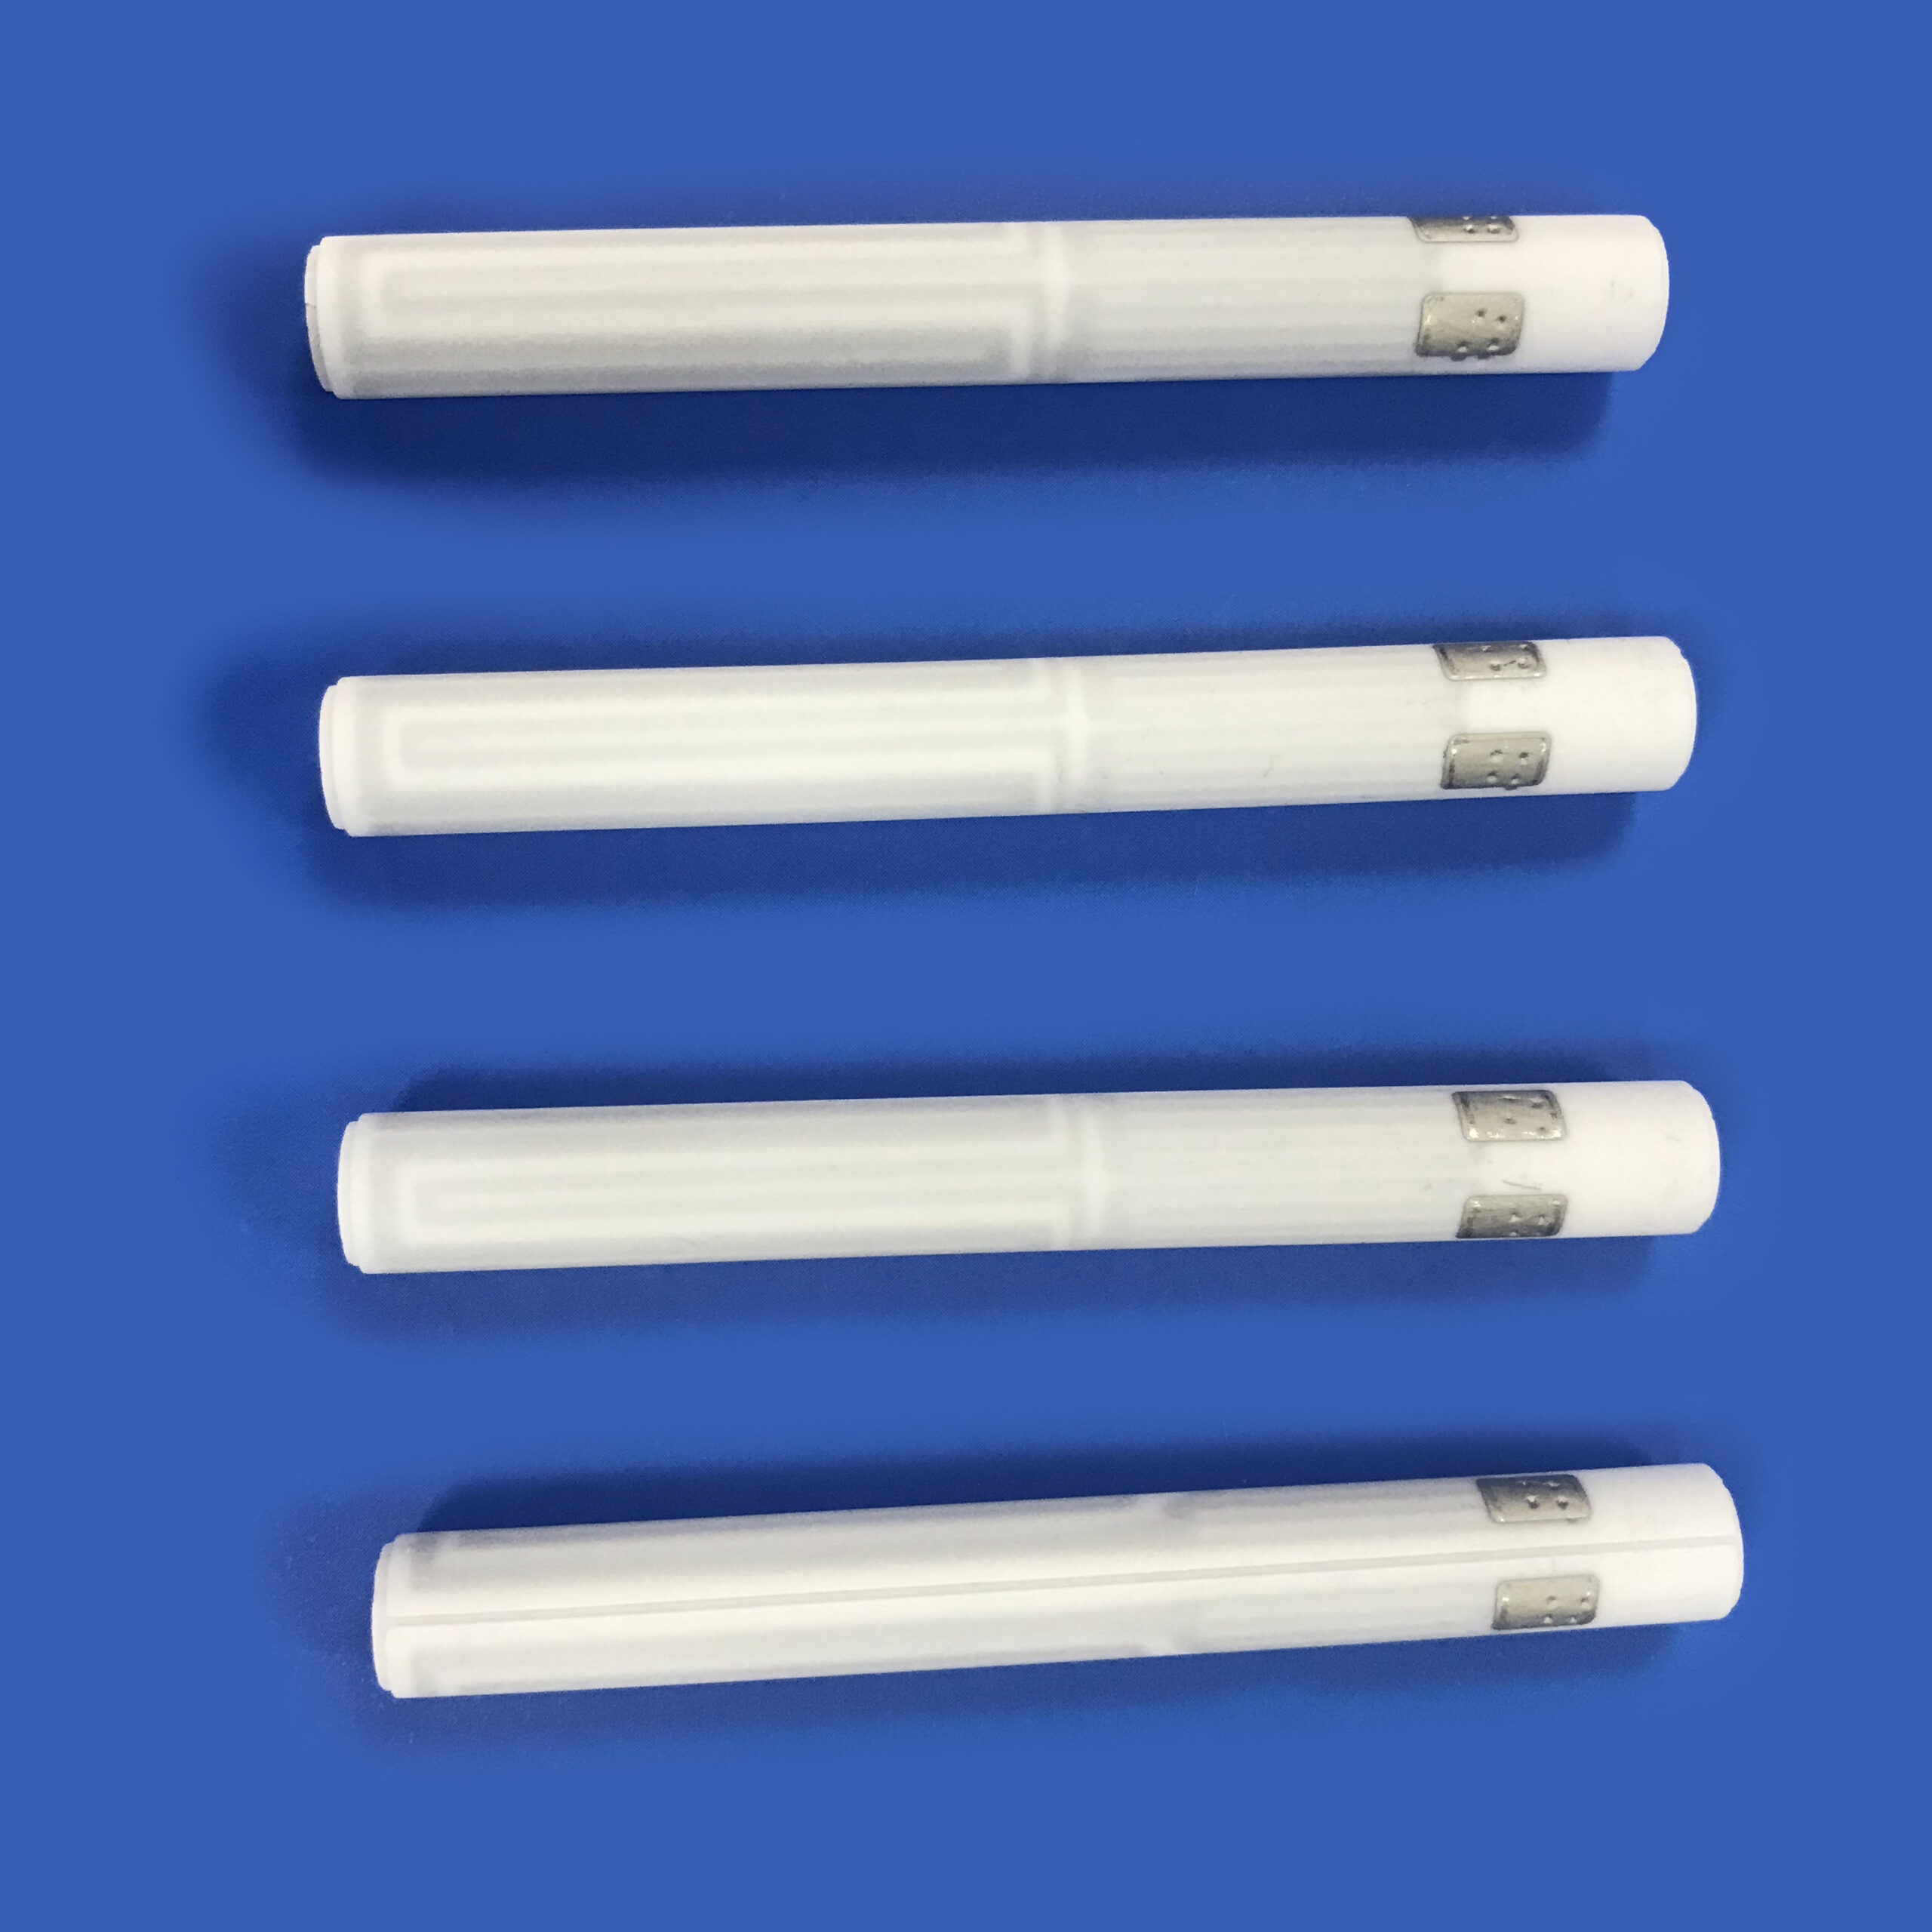 Ceramic Heating Rods For Direct insertion probe (DIP)